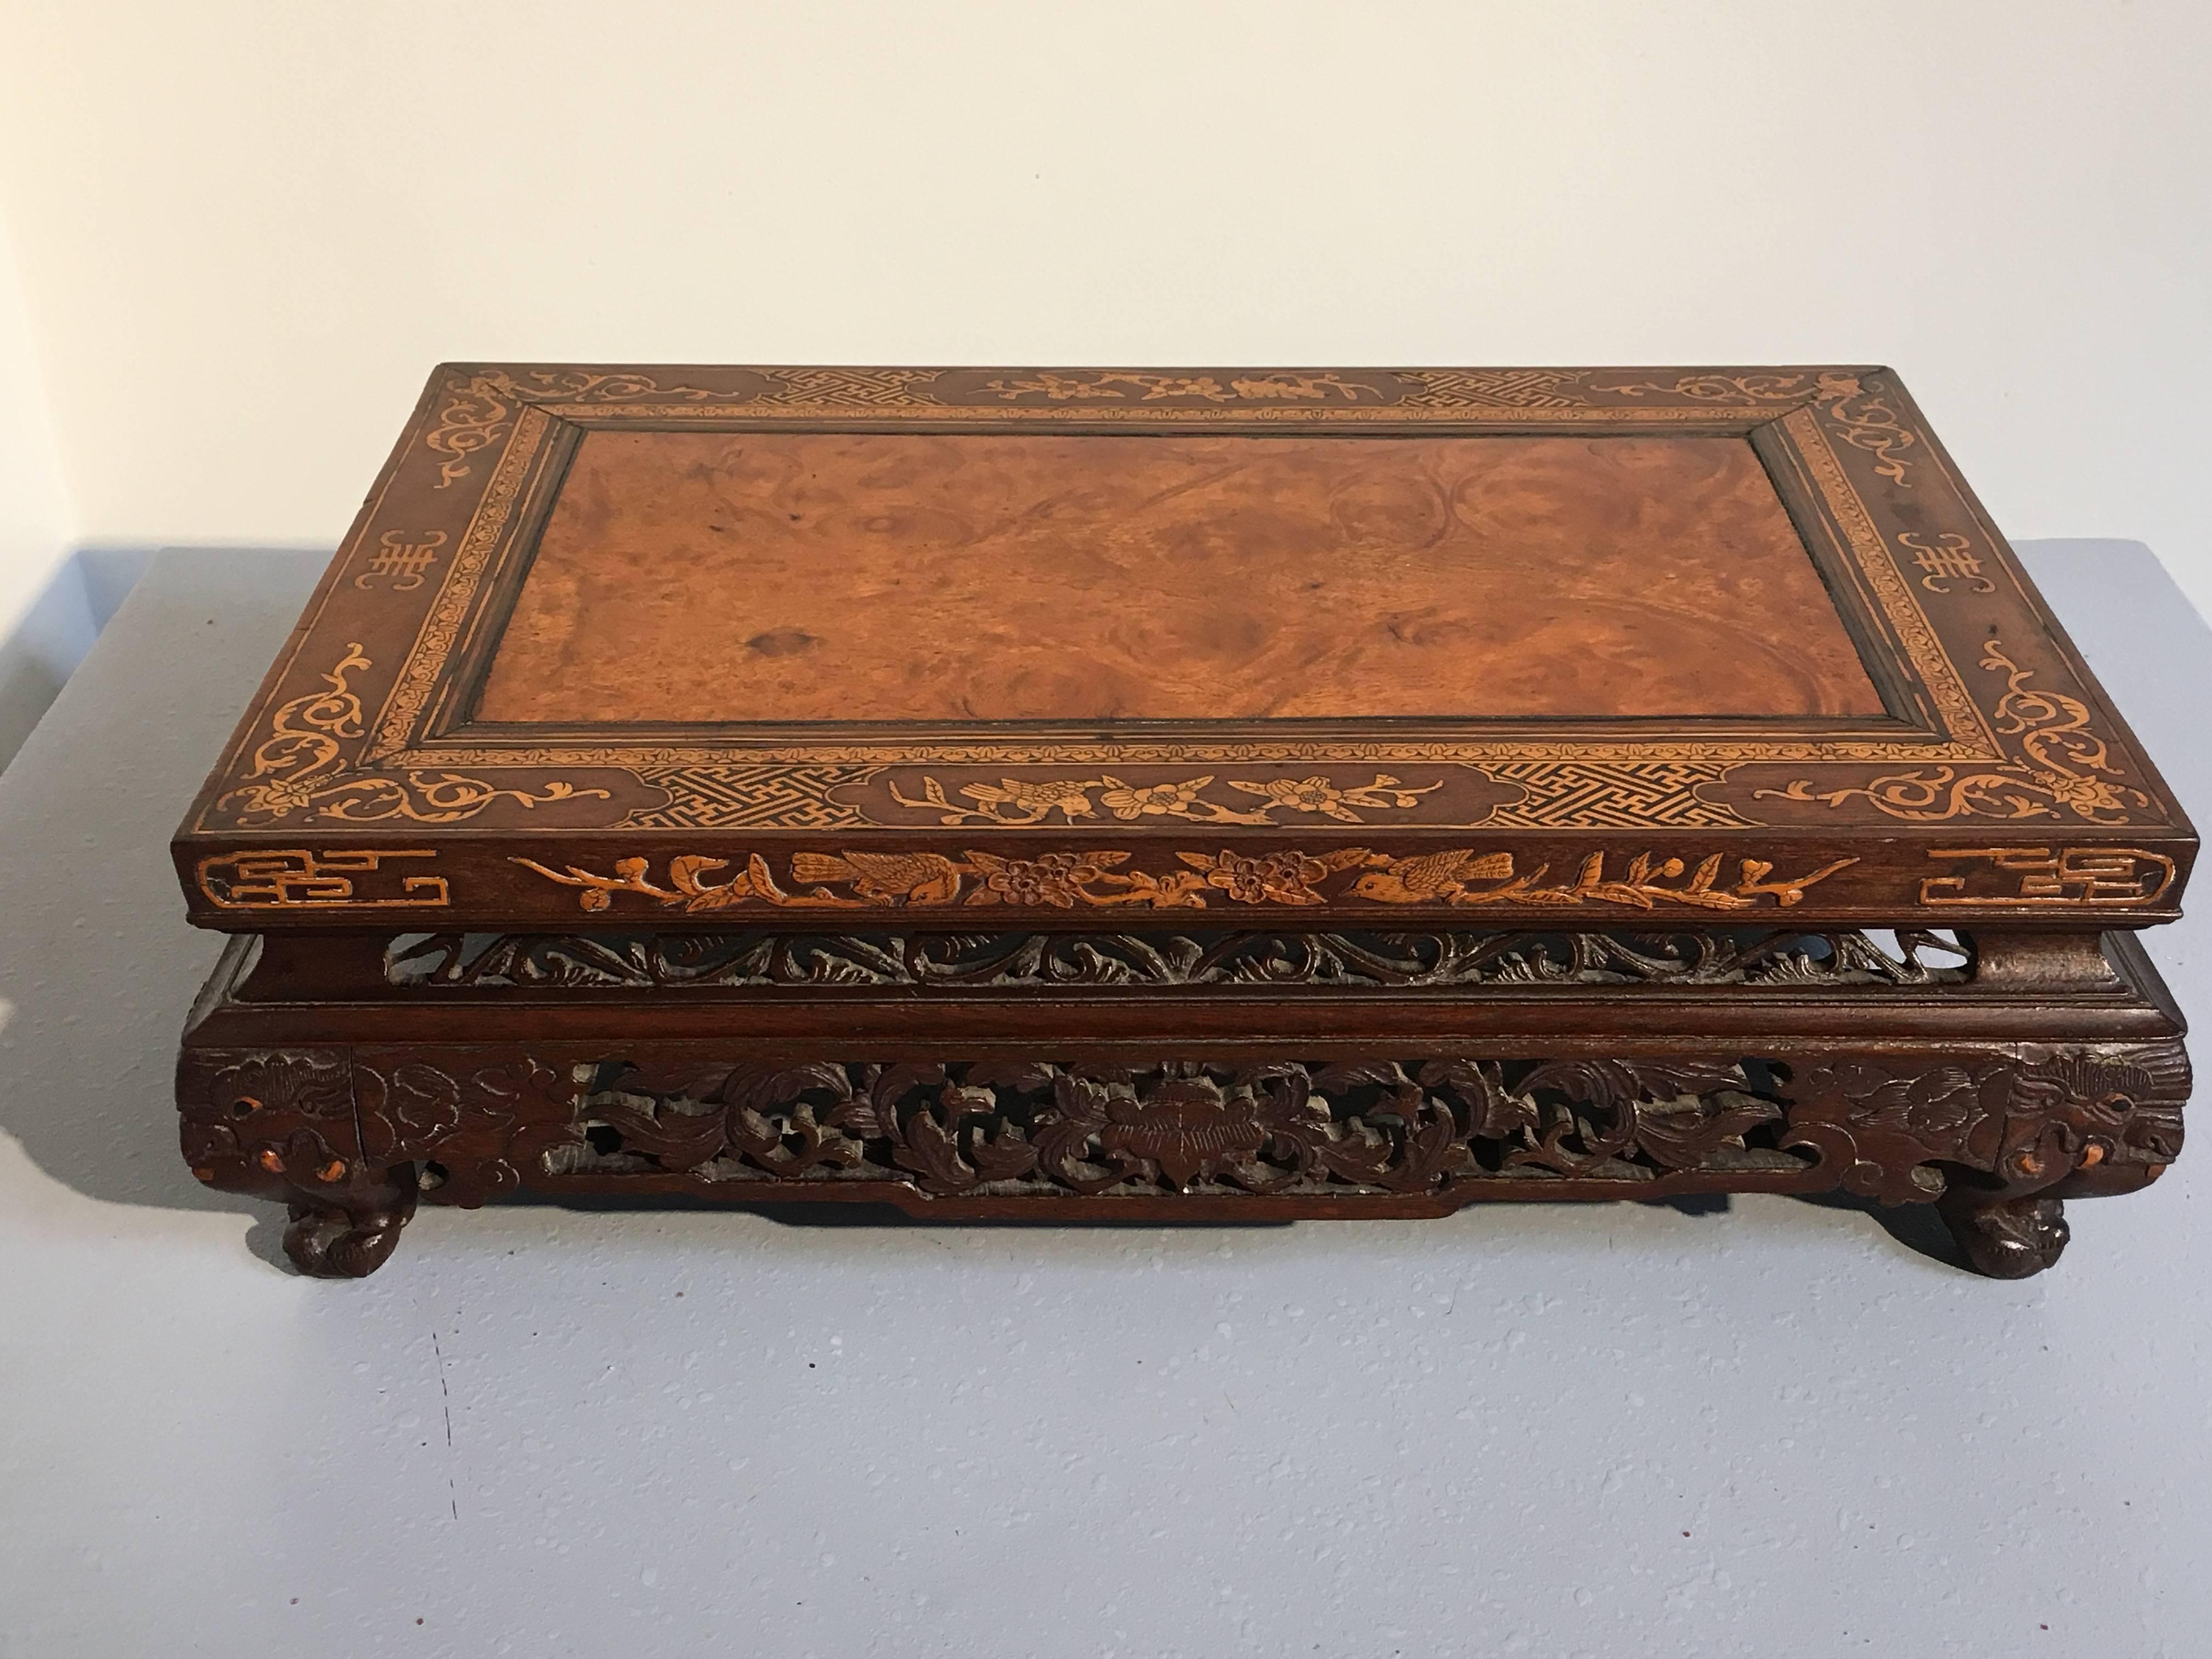 A remarkable straits Chinese (also known as Peranakan or Nyonya) carved hardwood and bamboo inlaid and embellished table-form stand, originally for display or incense, 19th-20th century.

The stand features a stunning floating veneer panel of